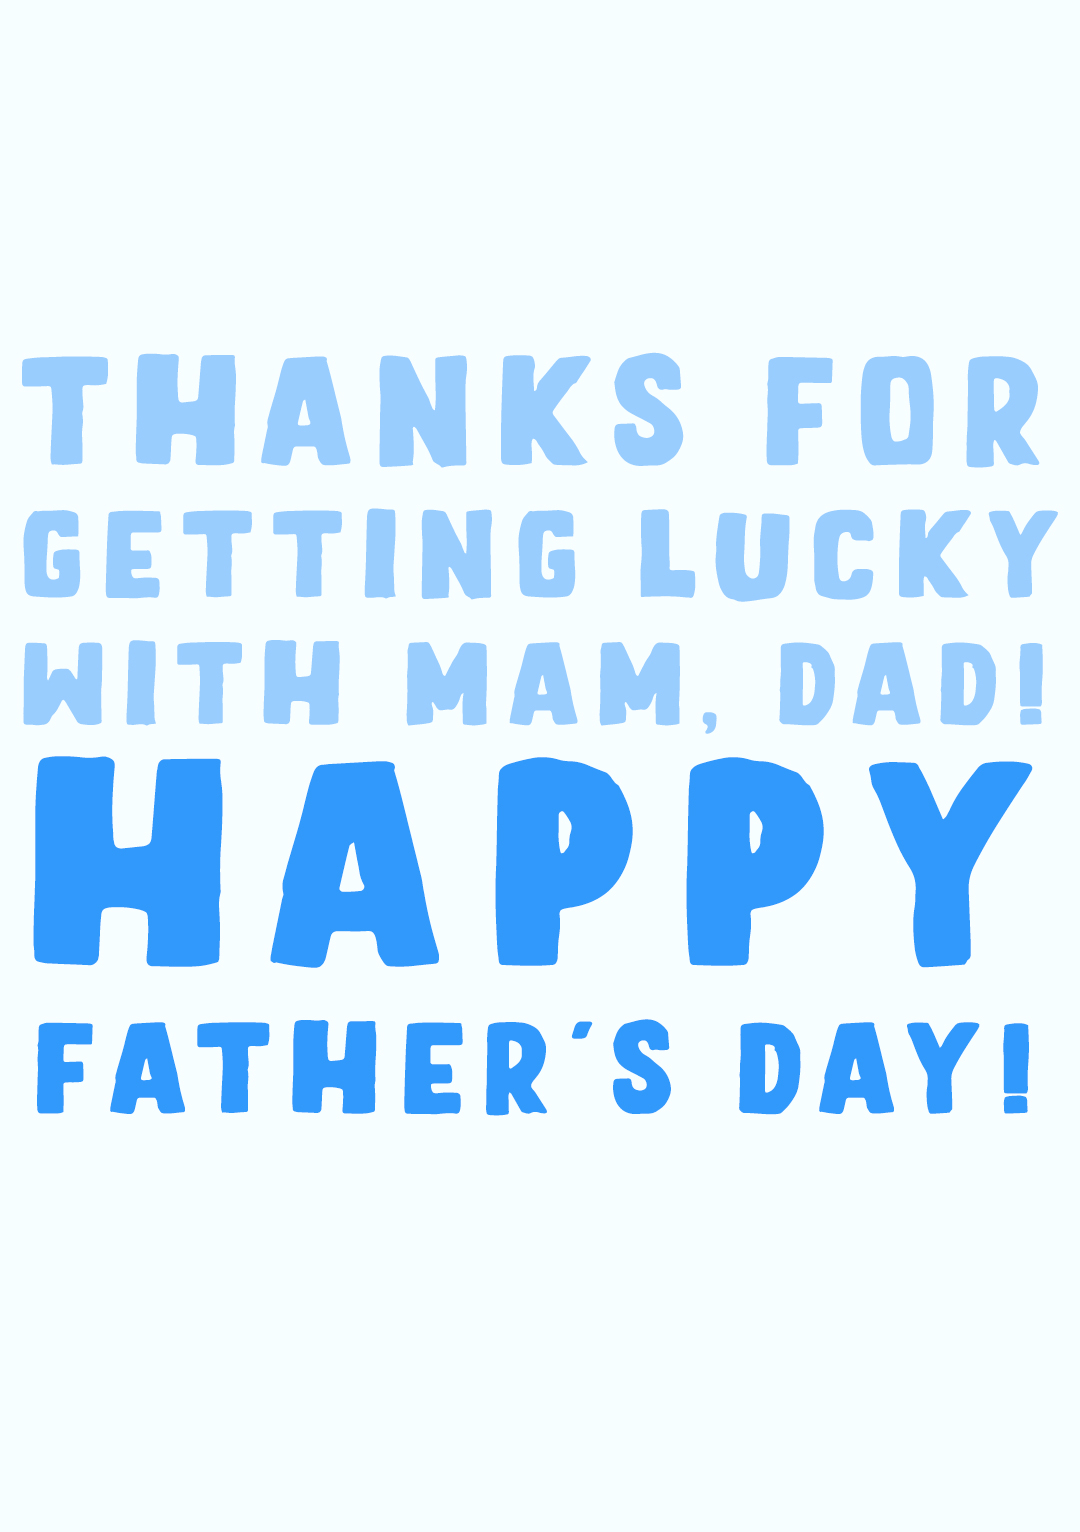 Thanks For Getting Lucky With Mam, Dad! Happy Father's Day